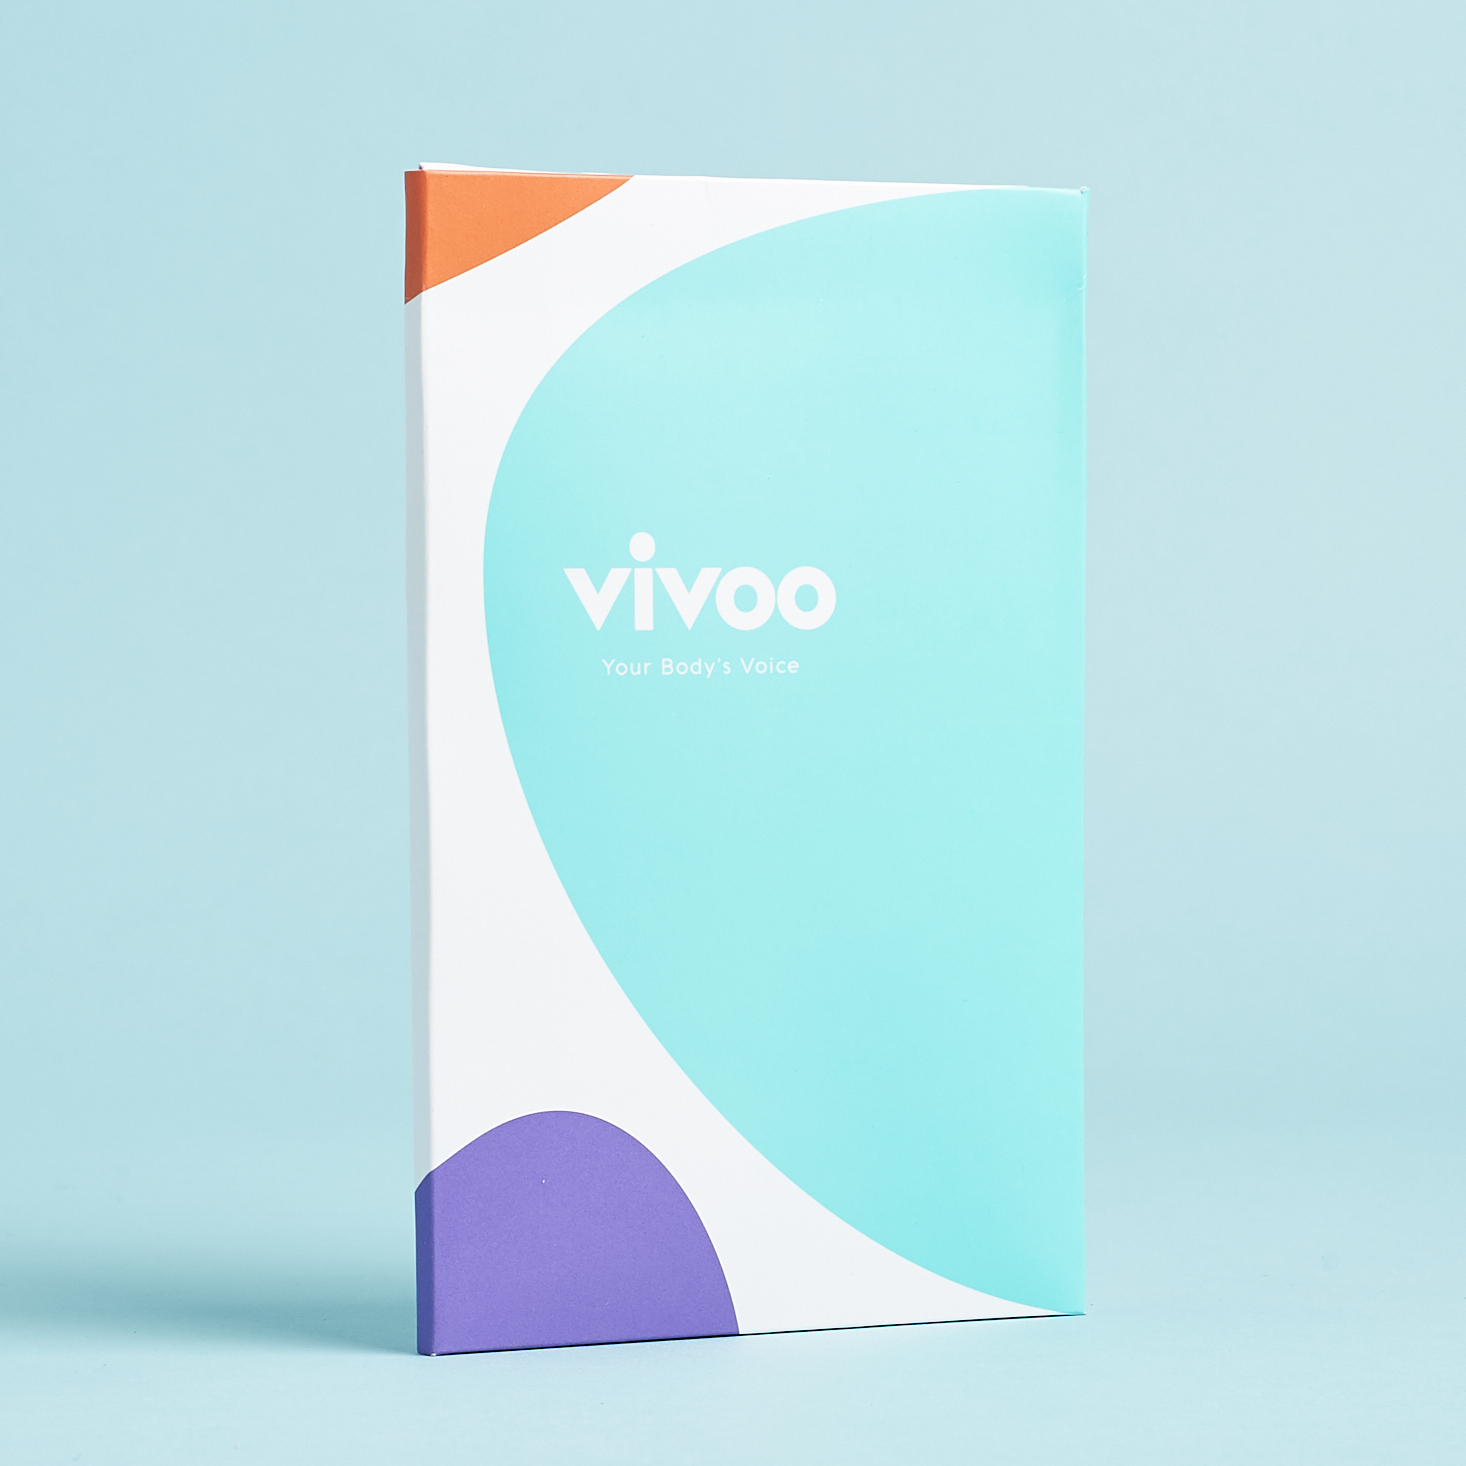 vivoo packet with colorful branding